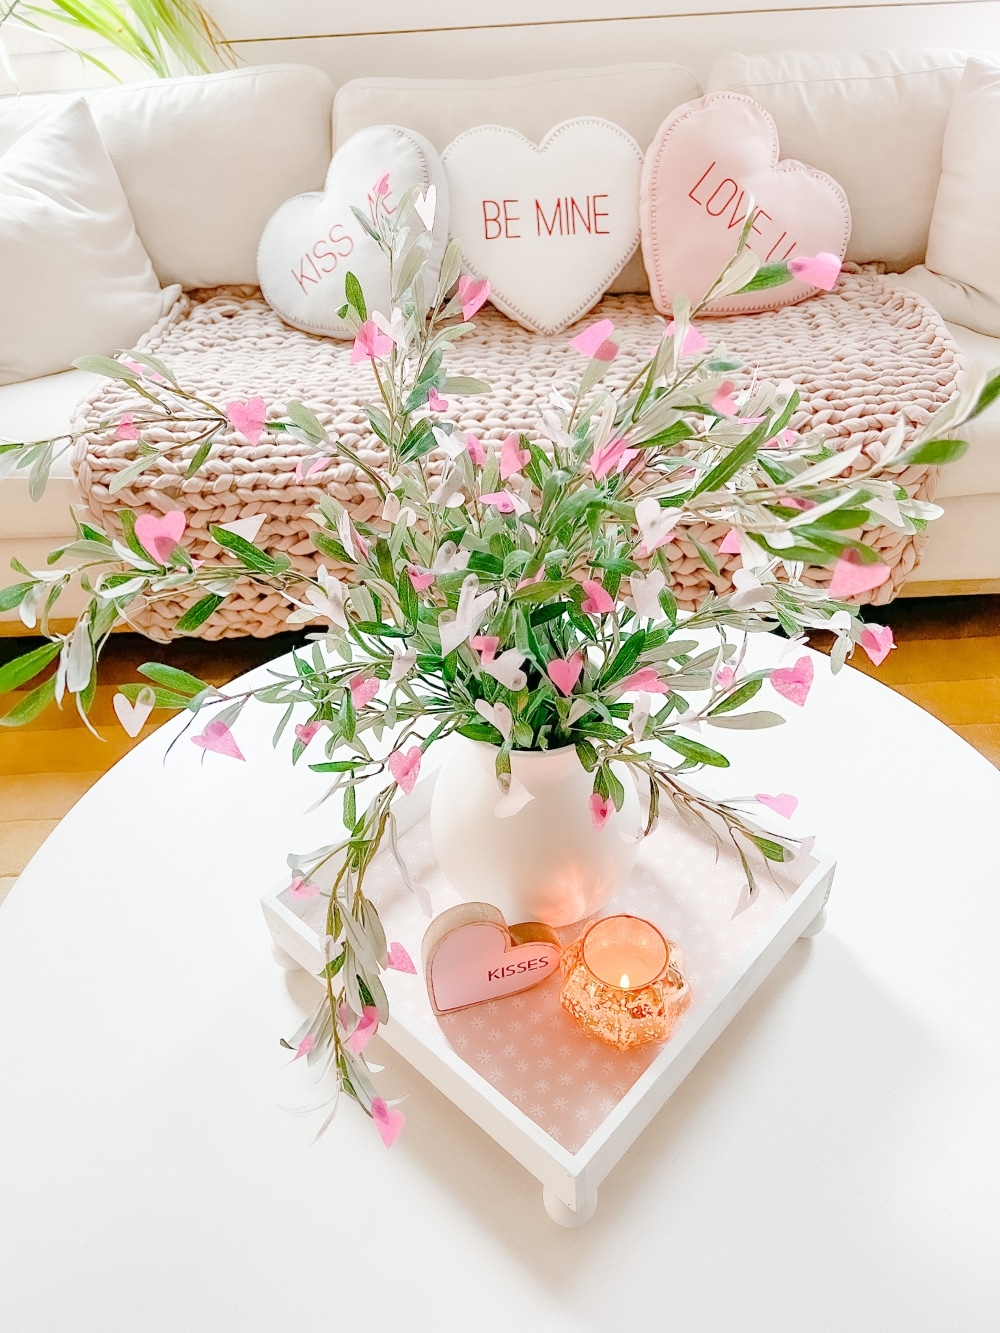 Tissue Paper Valentine Tree Centerpiece. Use inexpensive sheets of tissue paper to create a sweet valentine tree for a centerpiece or focal point! 